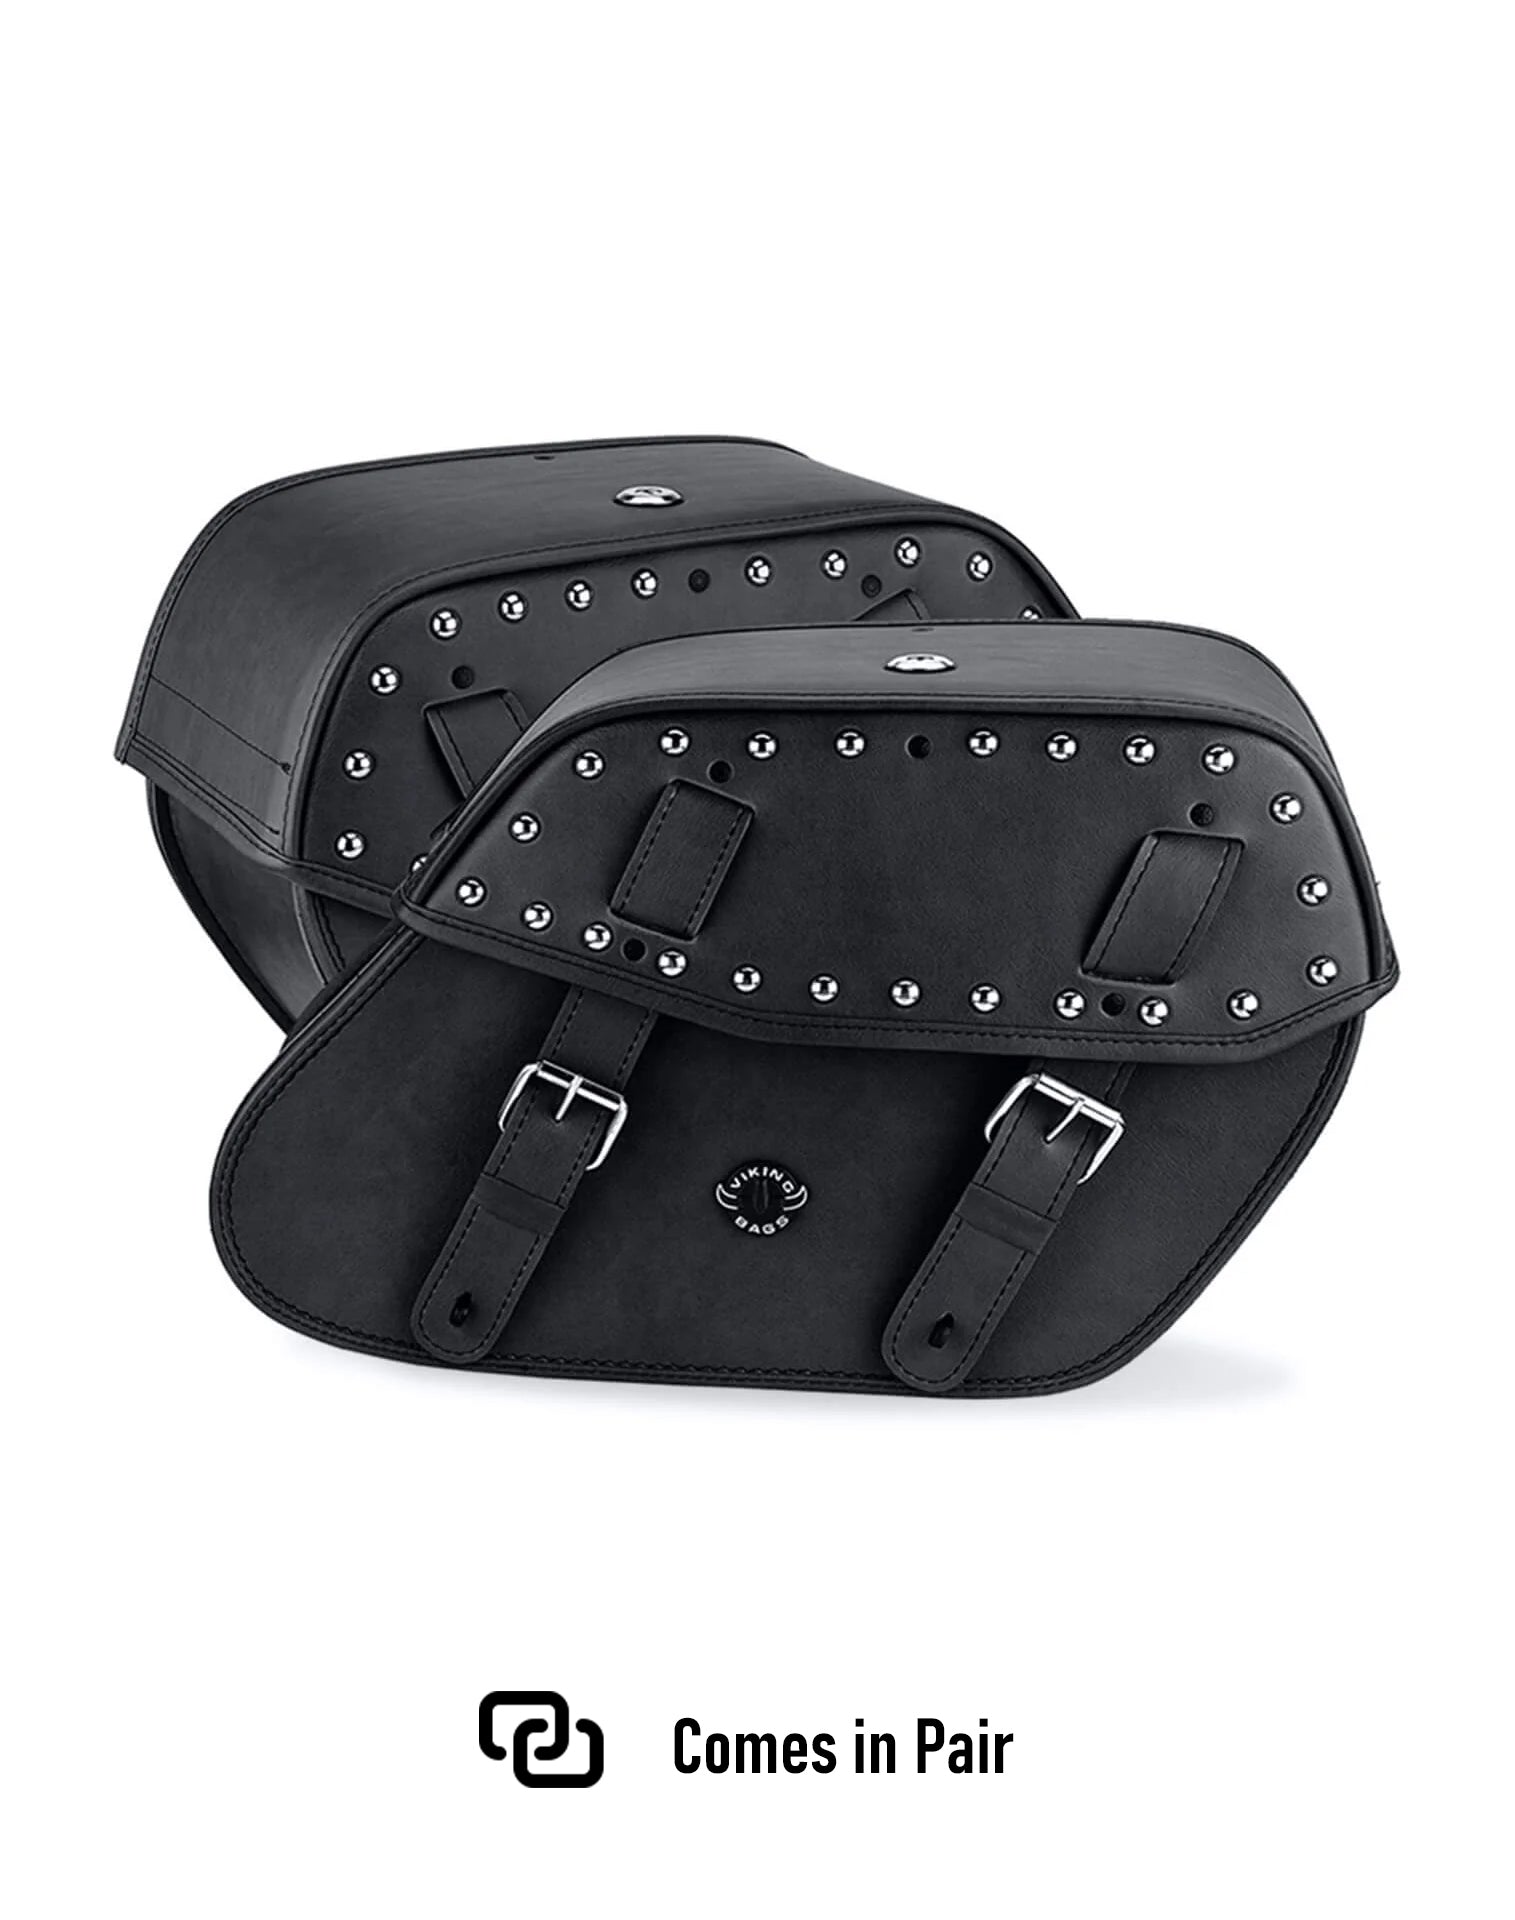 Viking Odin Large Victory Kingpin Studded Leather Motorcycle Saddlebags Weather Resistant Bags Comes in Pair